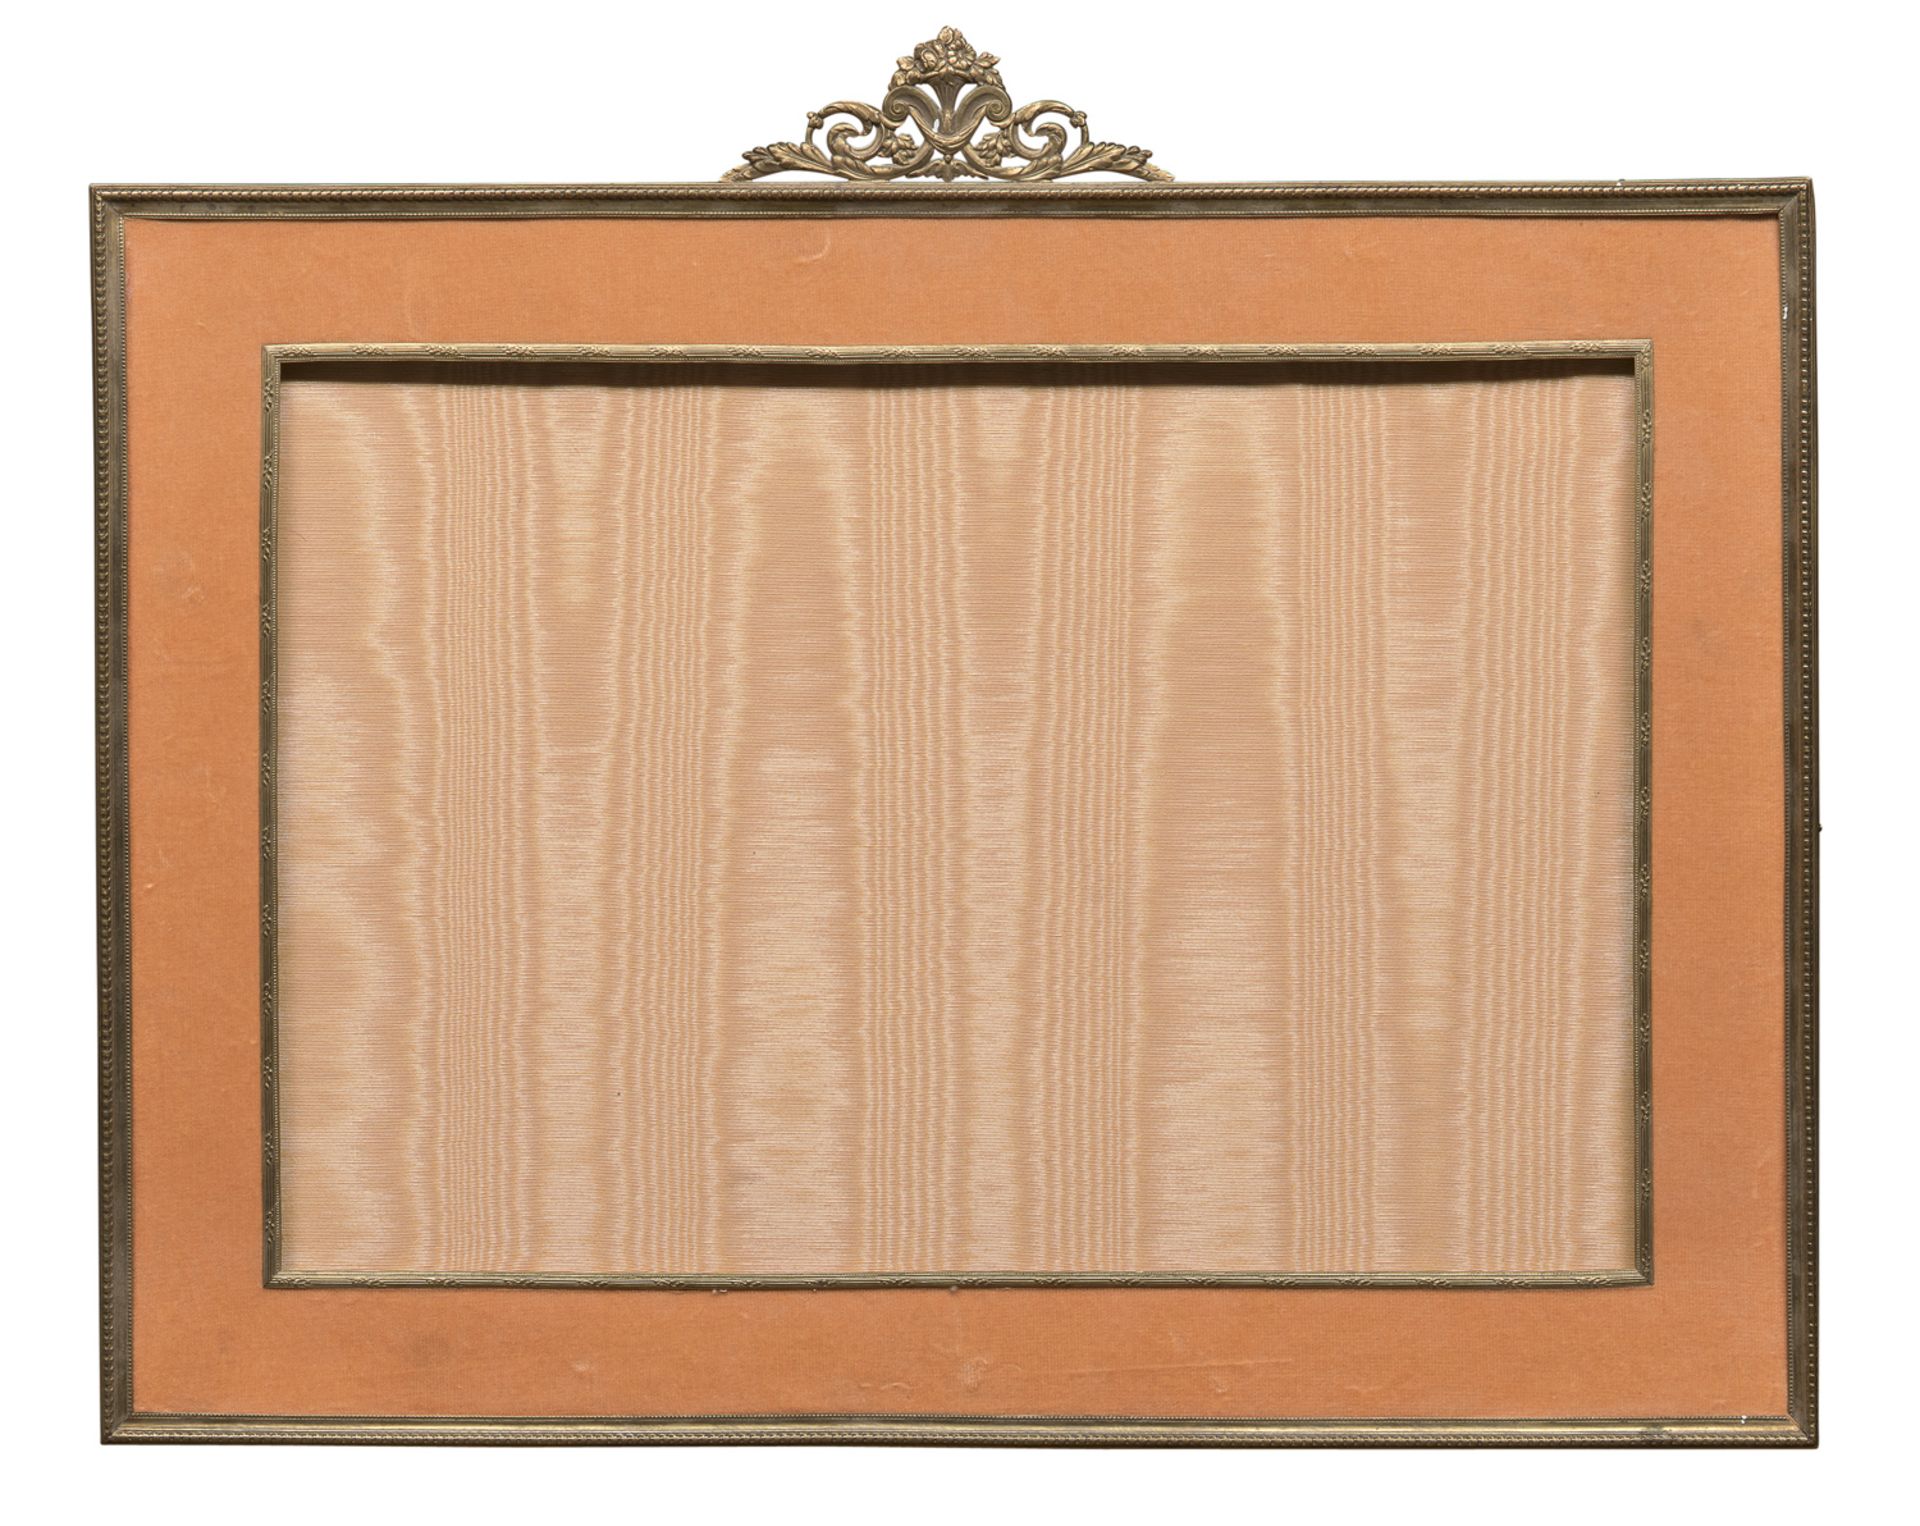 PHOTO FRAME IN SATIN COVERED WOOD 20TH CENTURY